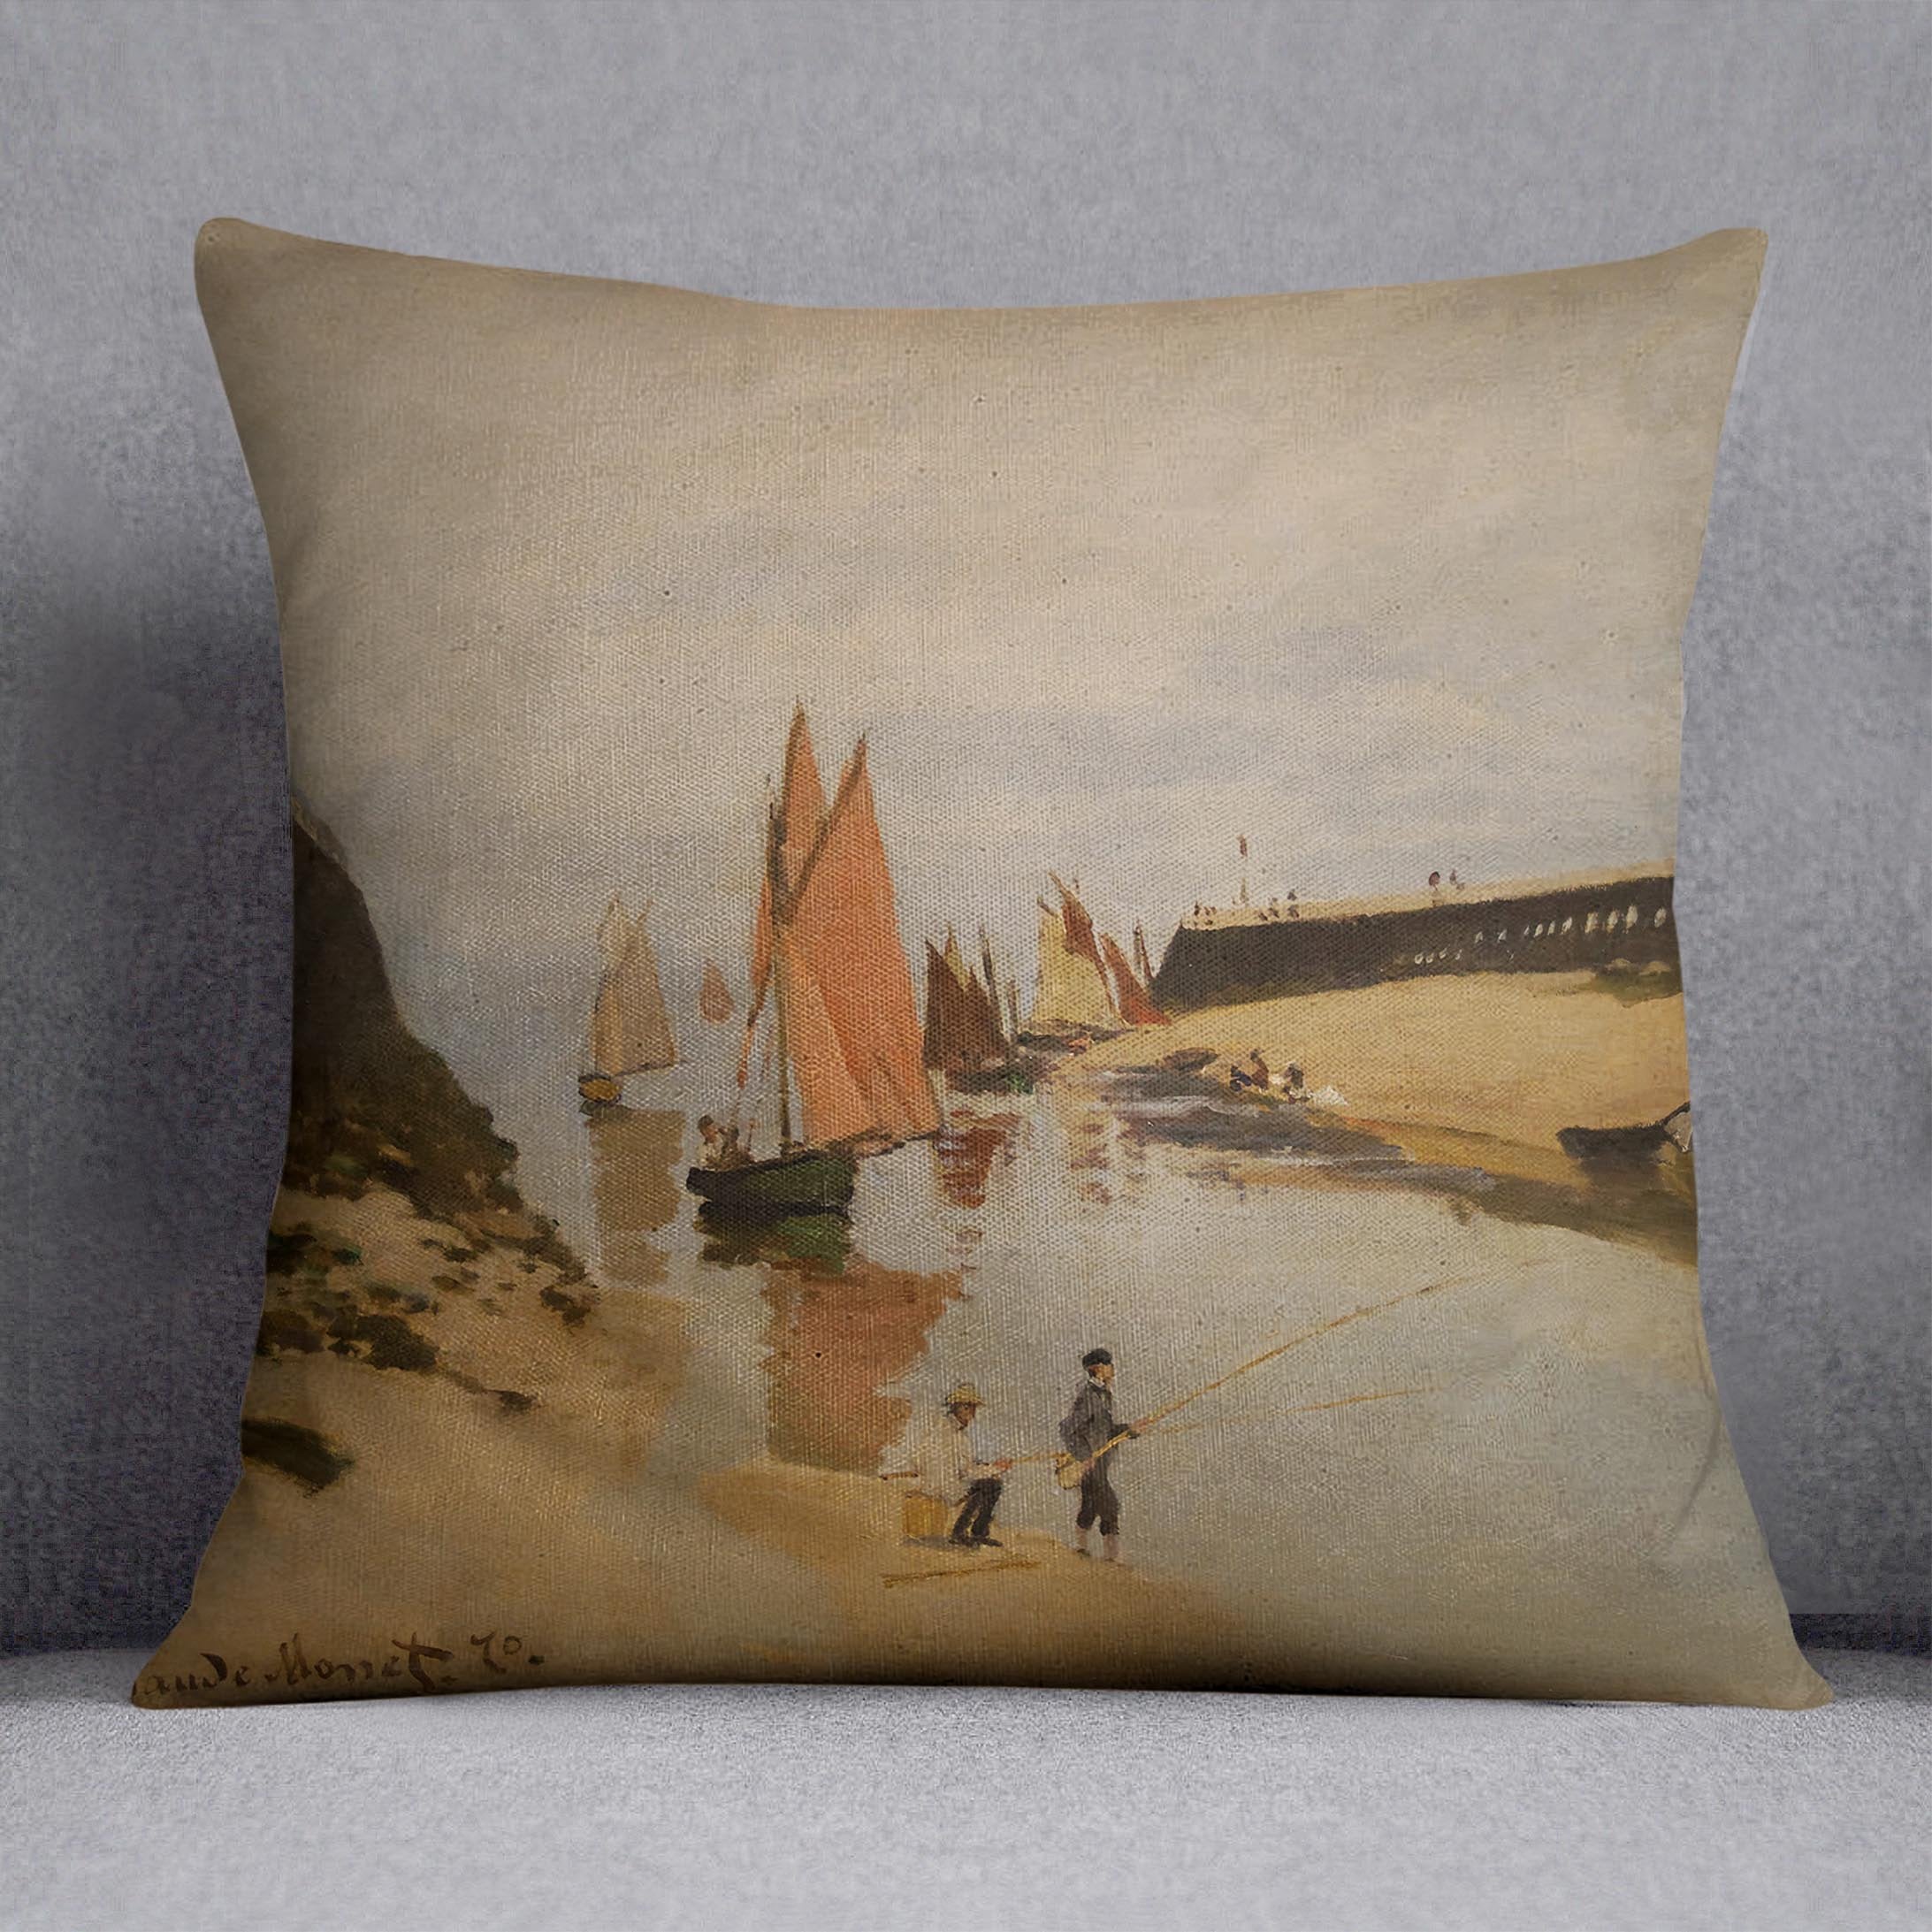 The harbor at Trouville by Monet Throw Pillow